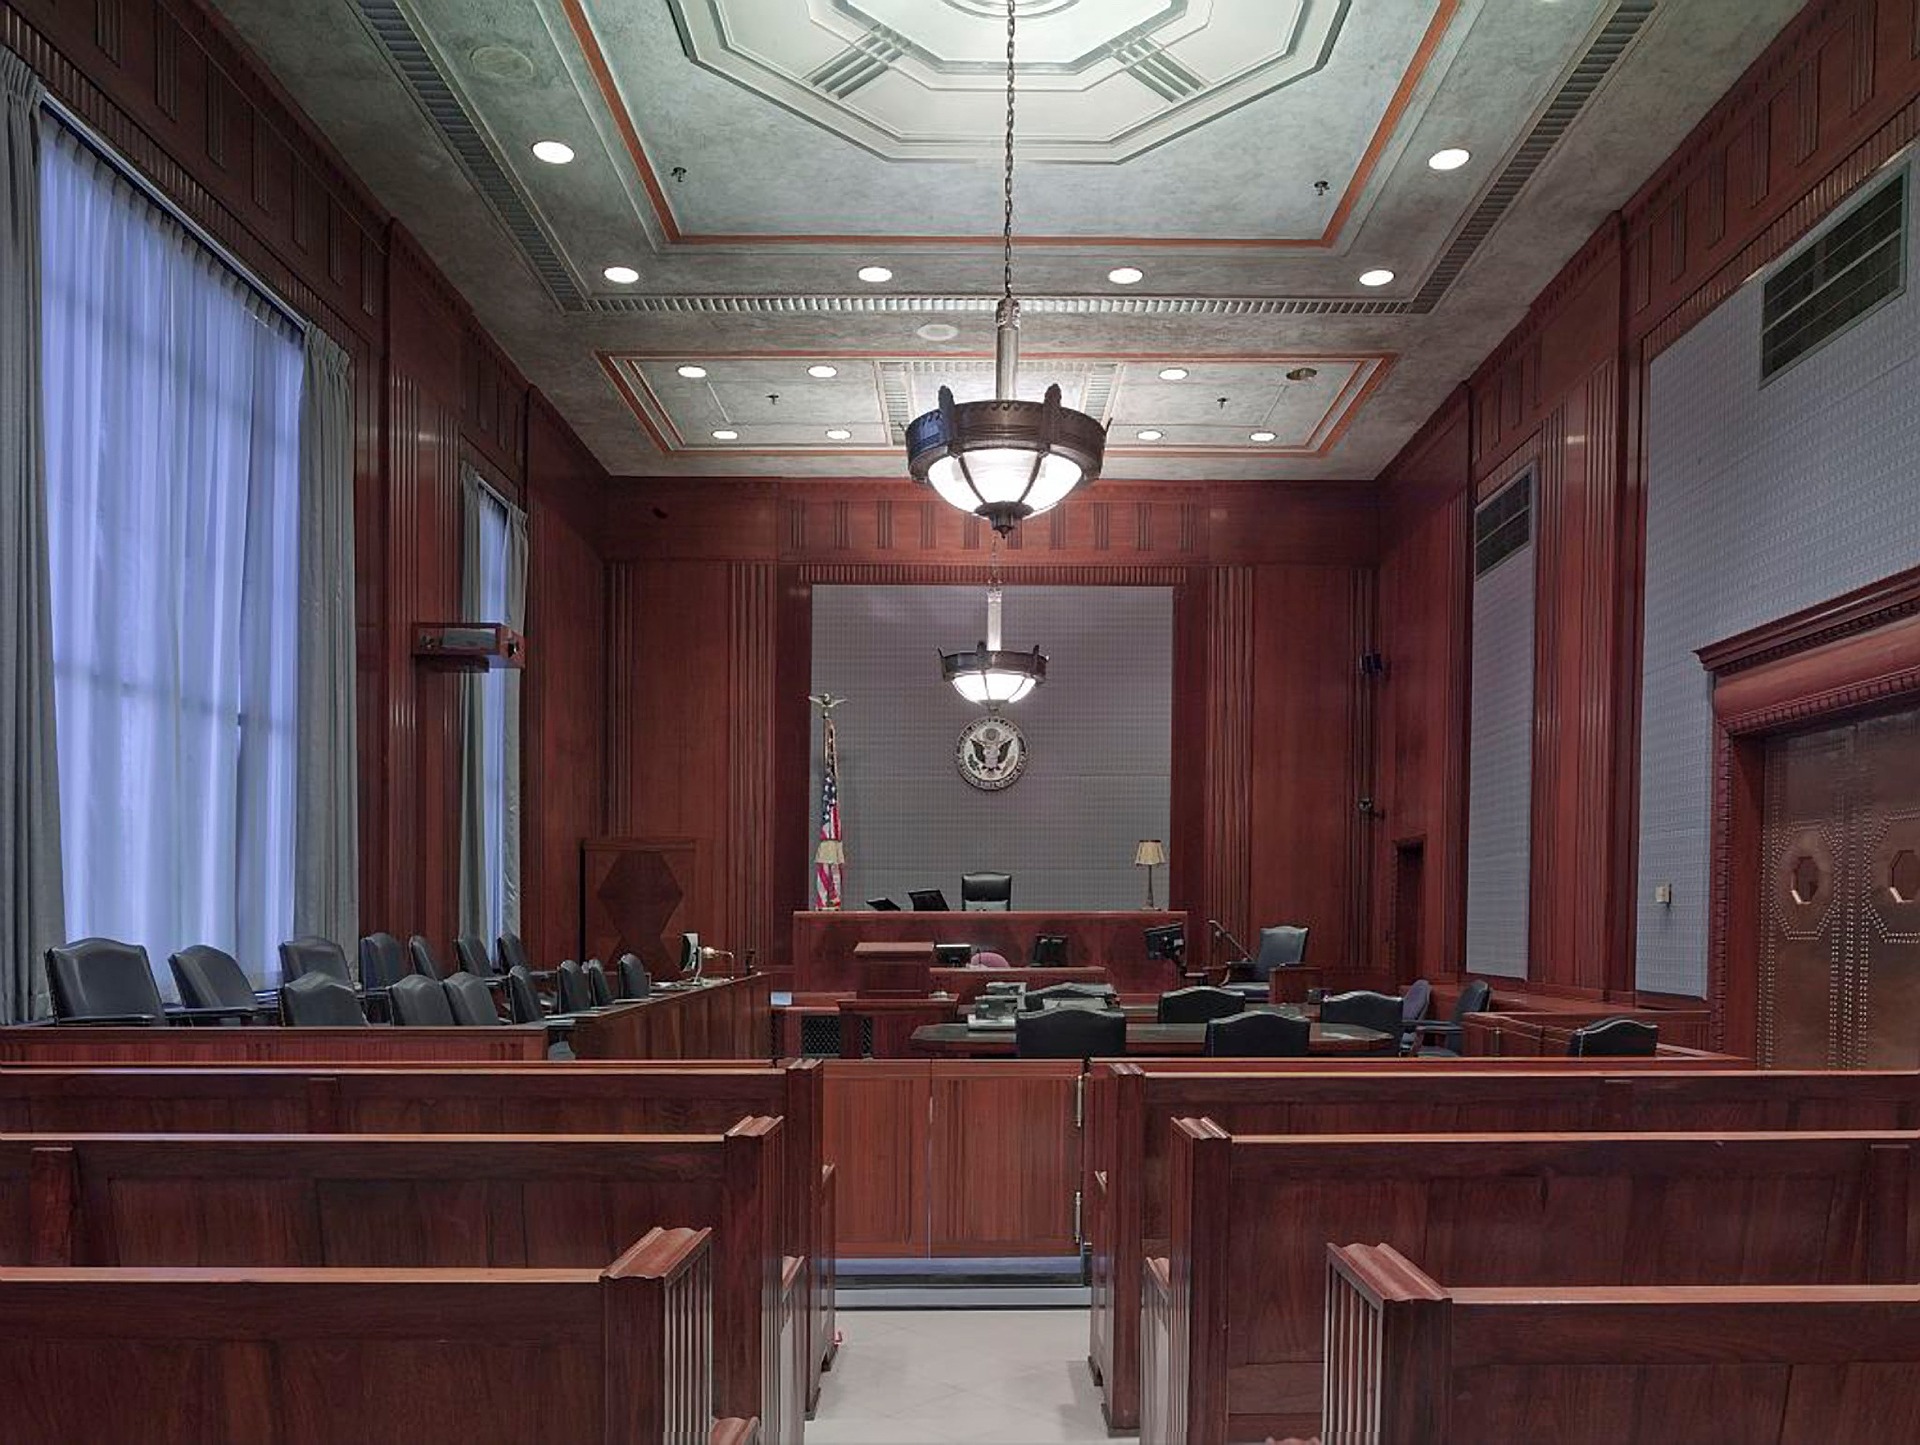 Interior of an empty courthouse, viewed in the perspective of any observer.